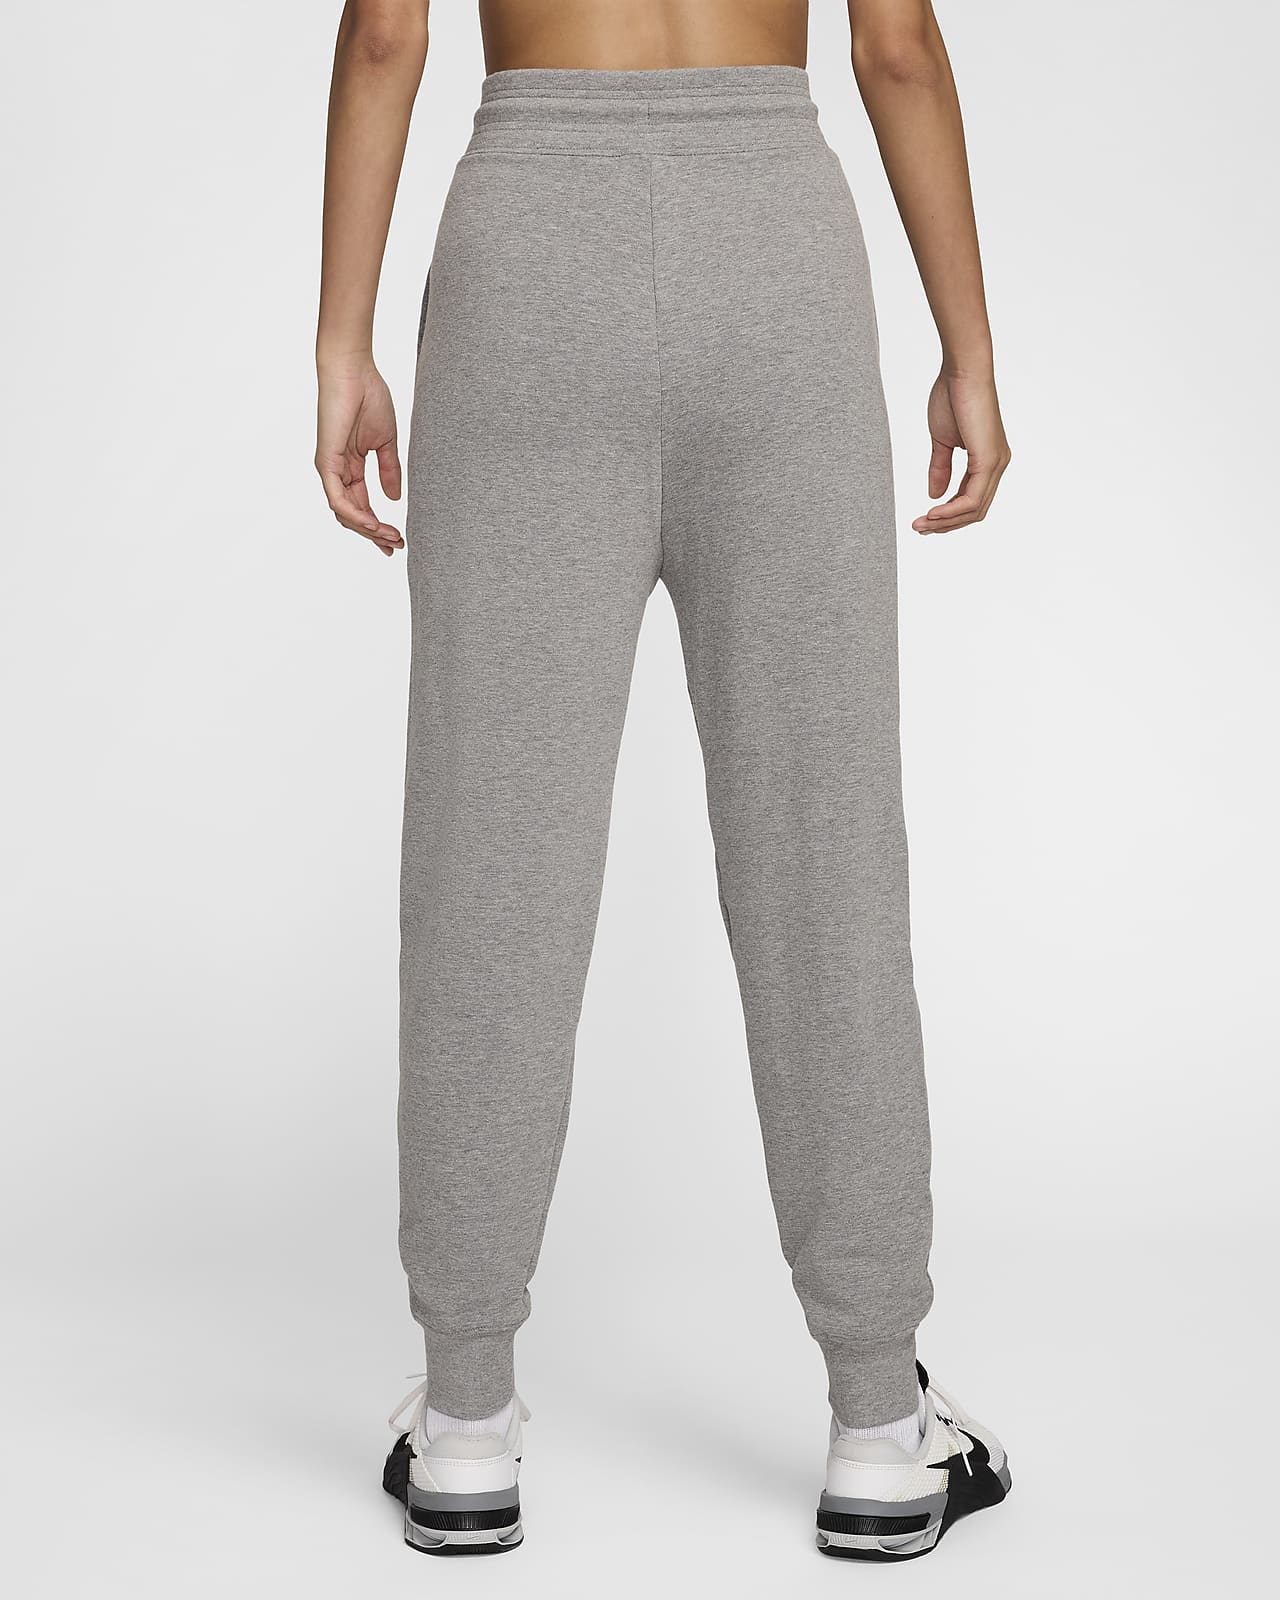 women plus size jogger pants - Best Prices and Online Promos - Mar